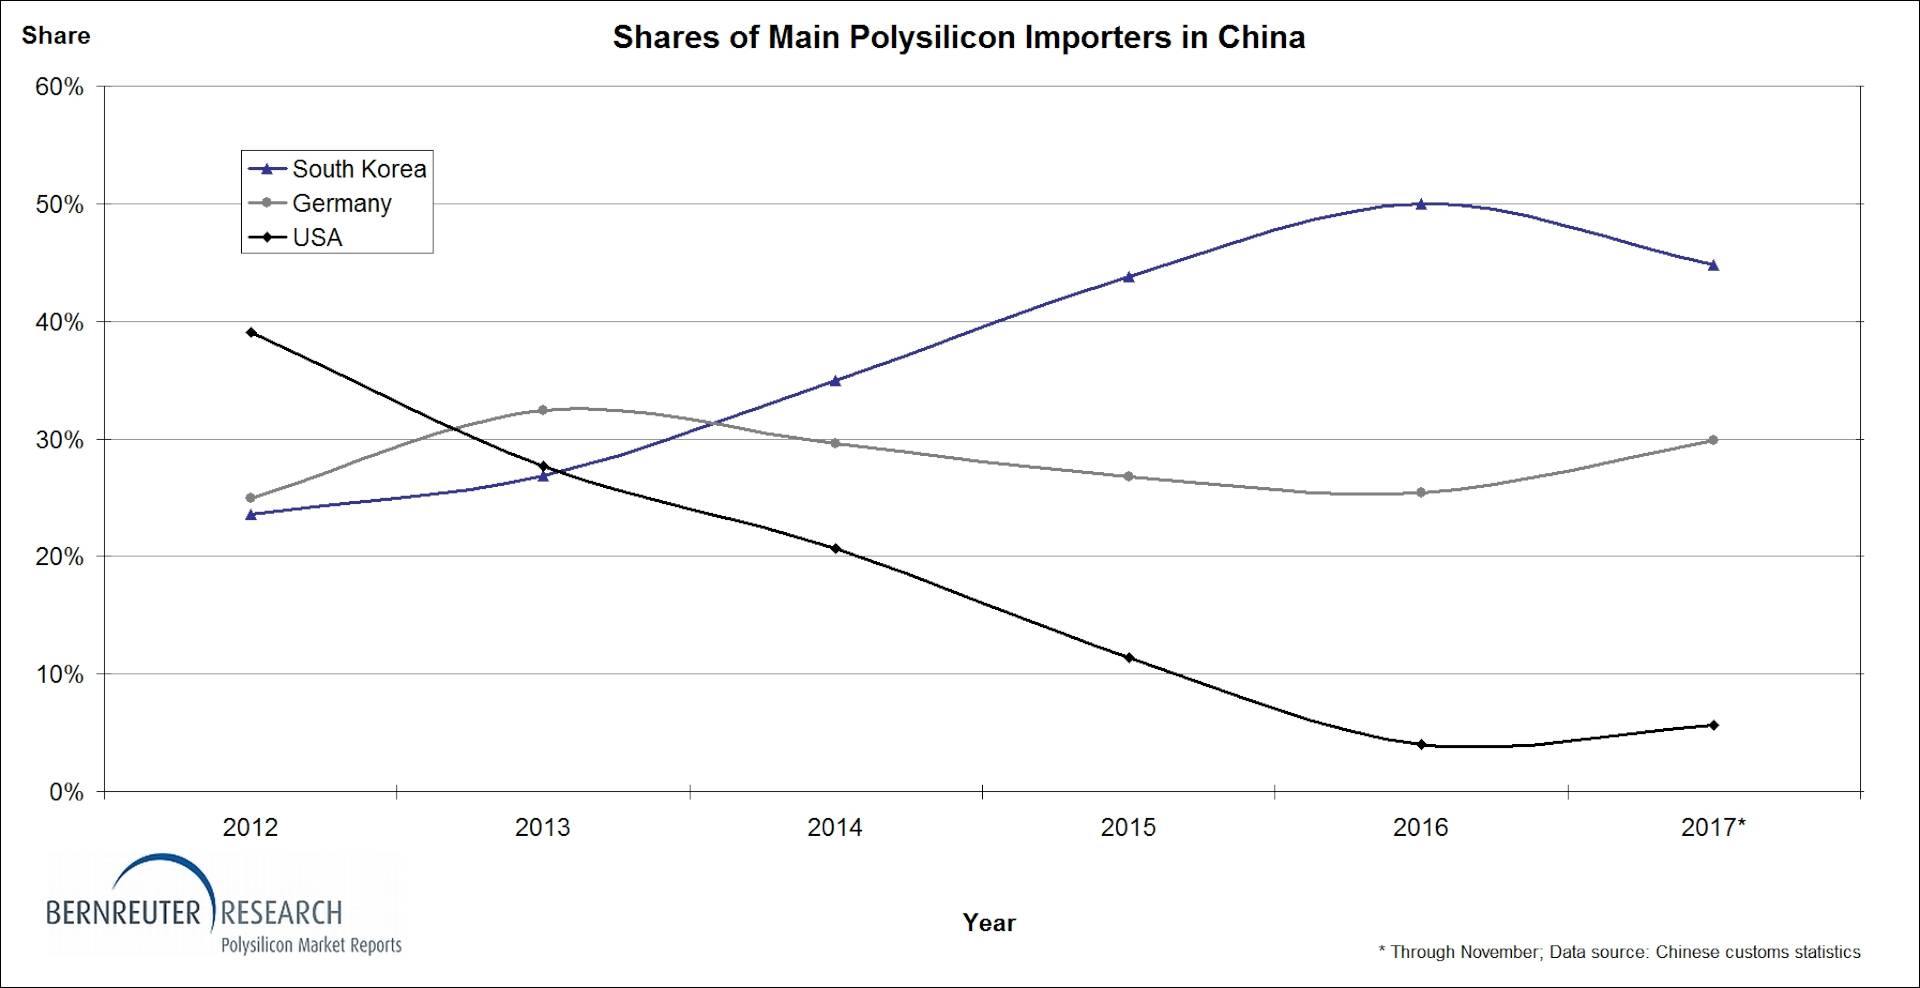 Shares of main polysilicon importers in China 2012 through 2017